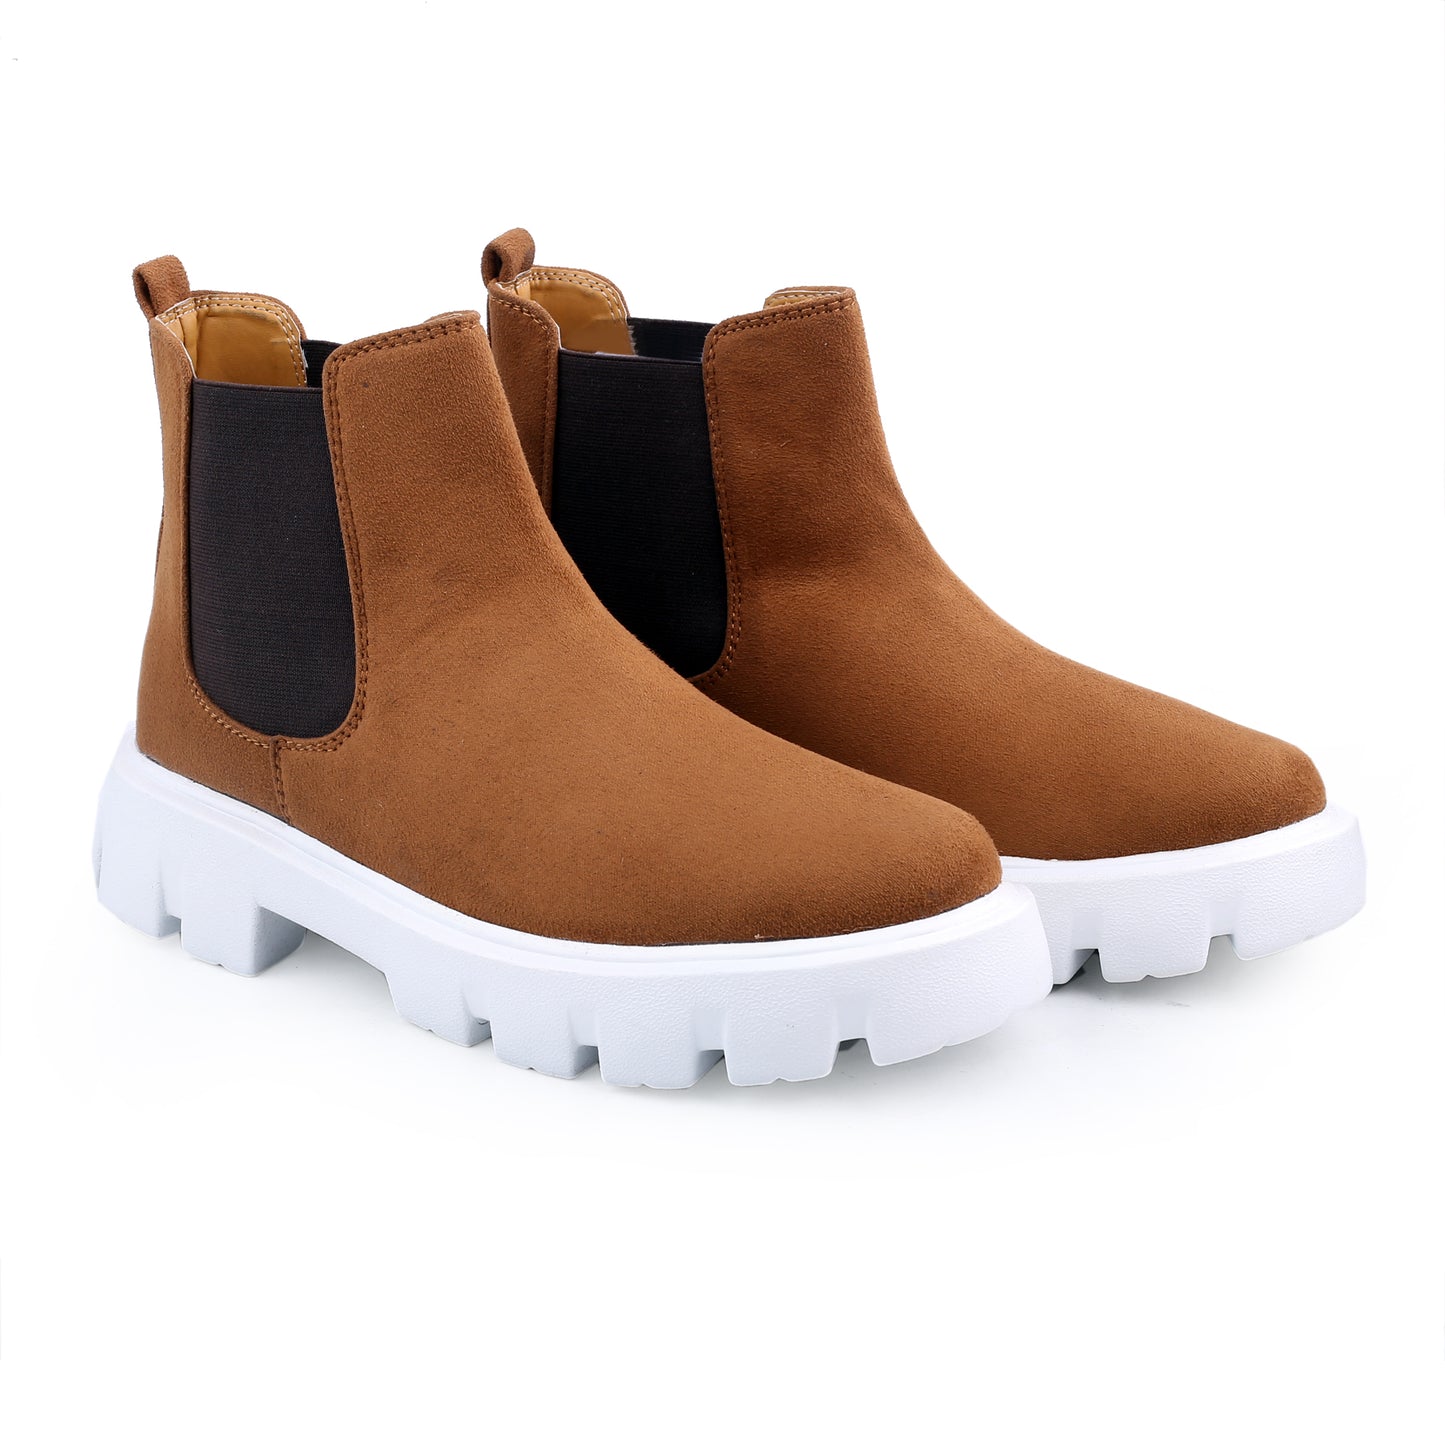 Bxxy's Vegan Suede Ultra Comfortable Slip-on Boots for Men